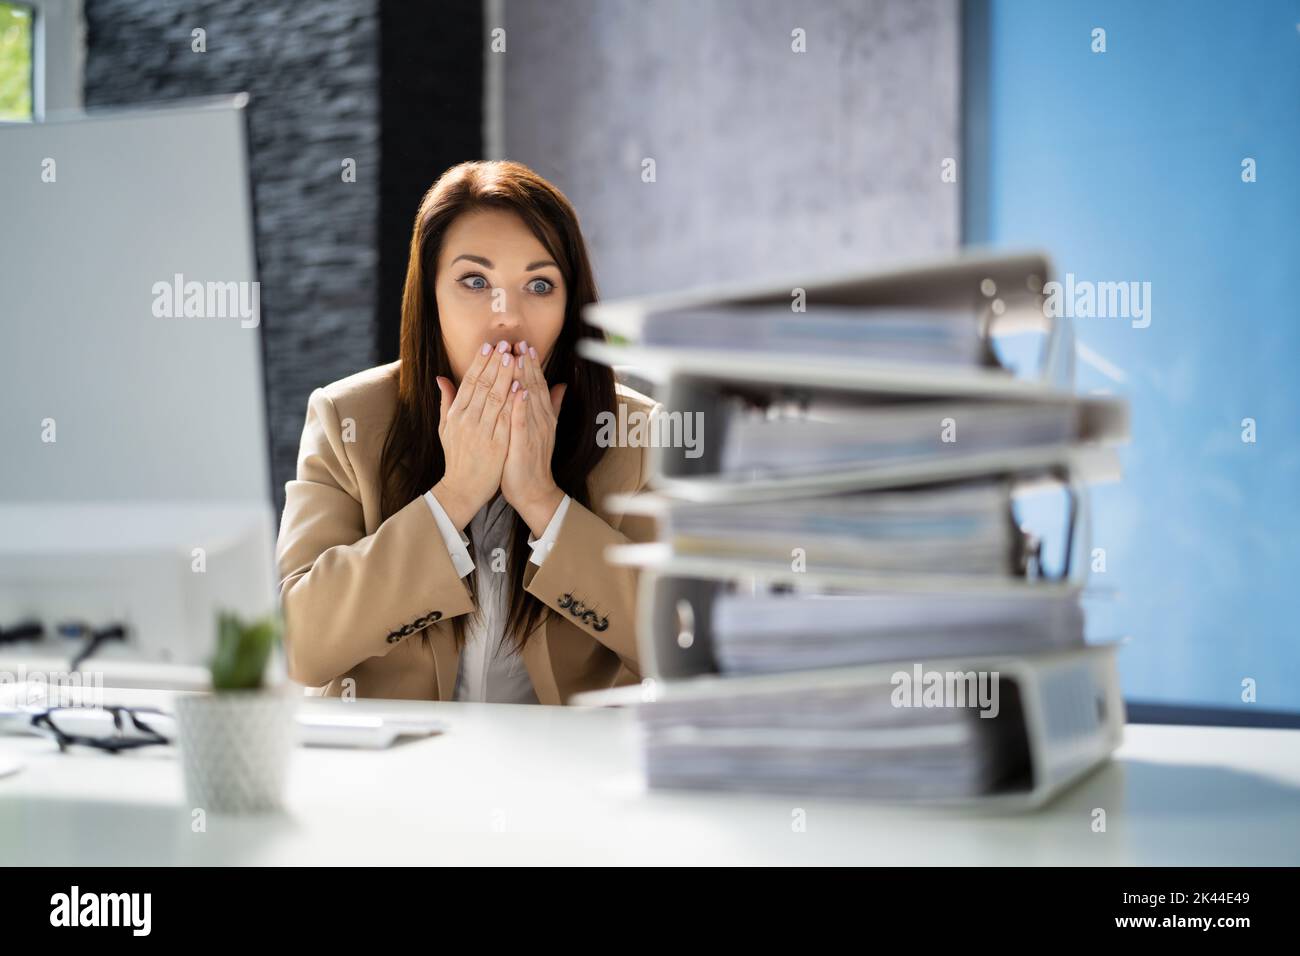 Workaholic Accountant Businesswoman With Headache And Stress Stock Photo